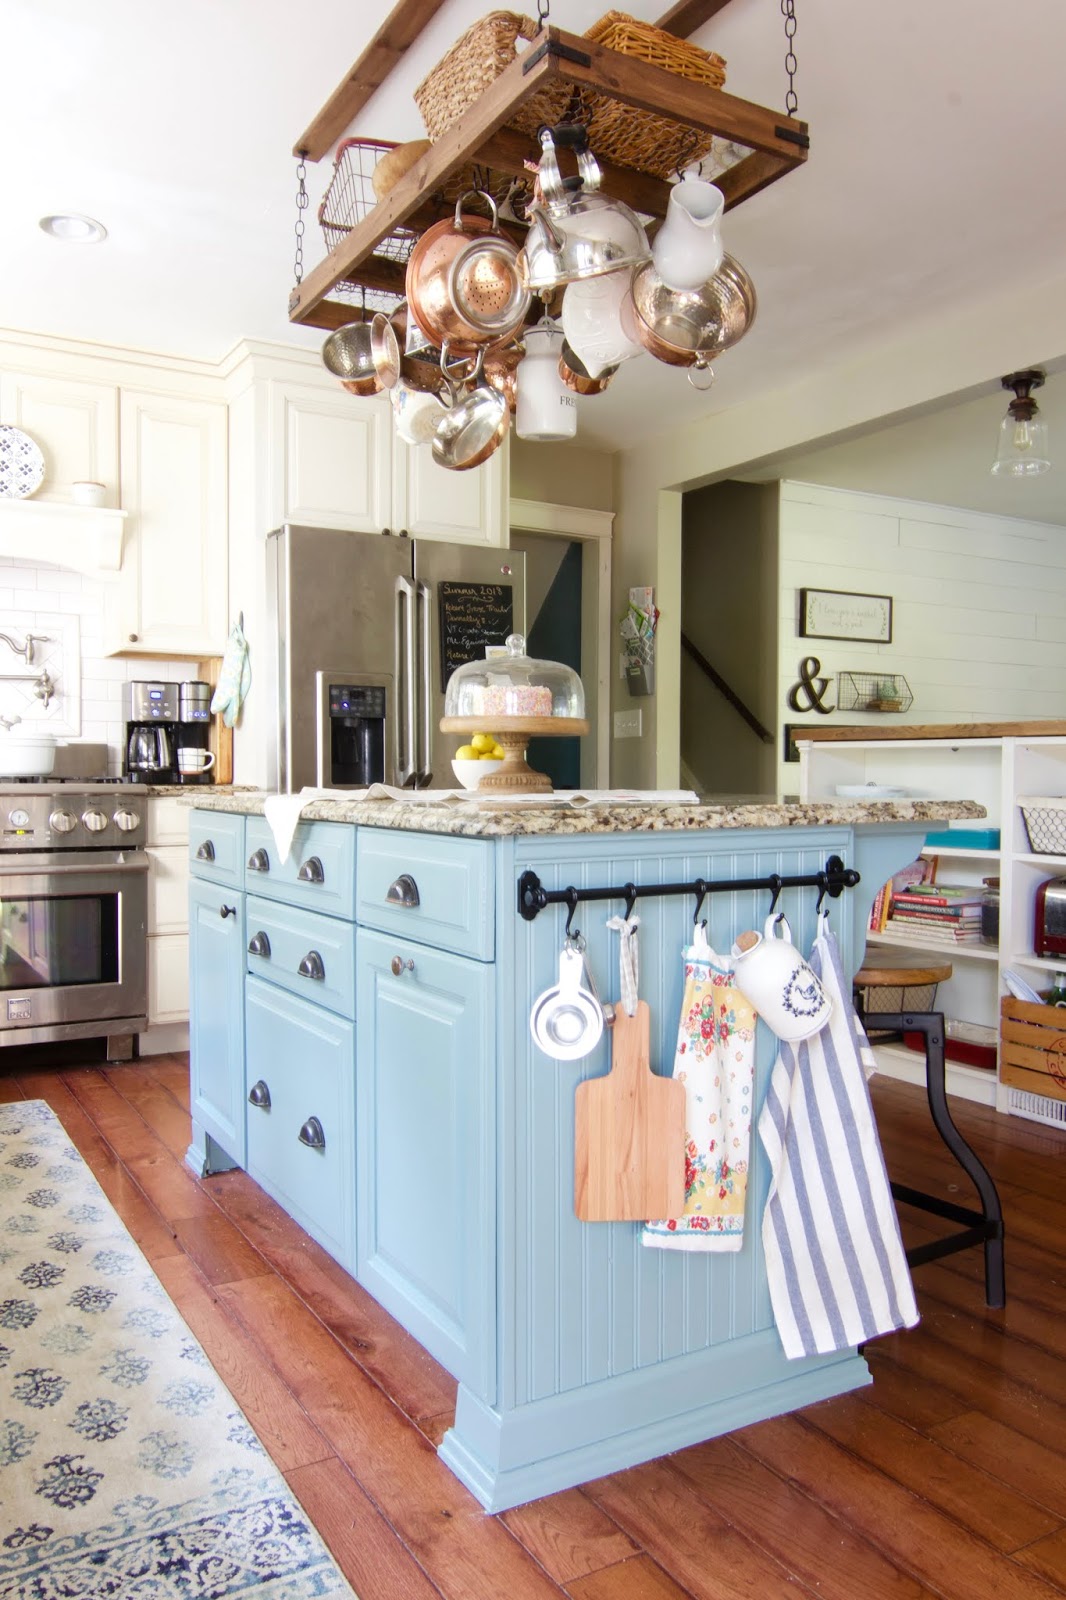 How To Paint A Kitchen Island At Home With Ashley